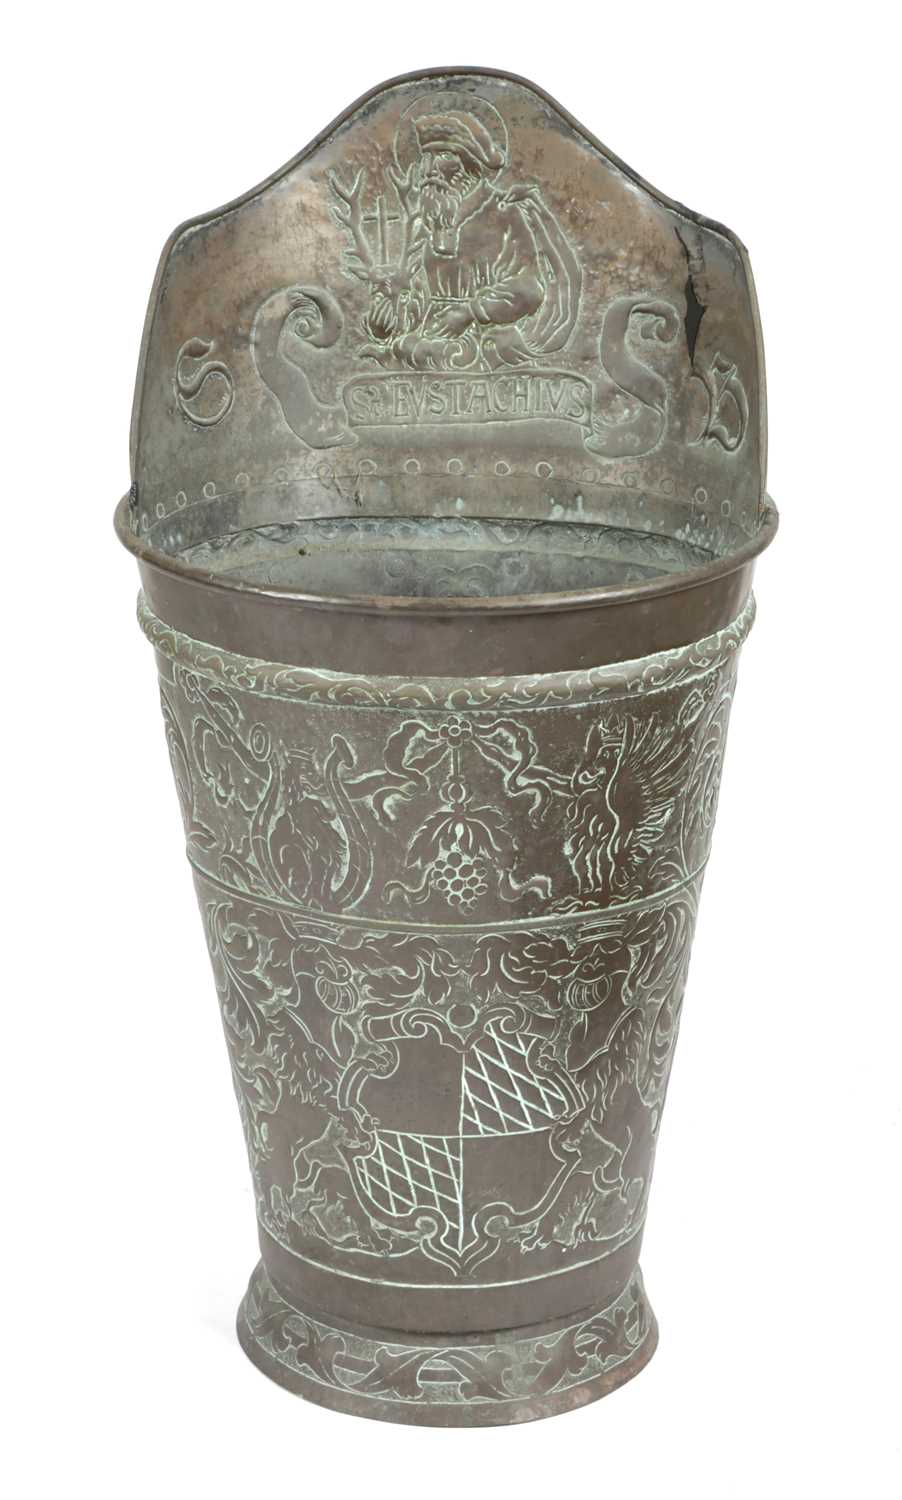 A DUTCH COPPER GRAPE HOD LATE 19TH CENTURY repoussé decorated with a coat of arms, scrolling